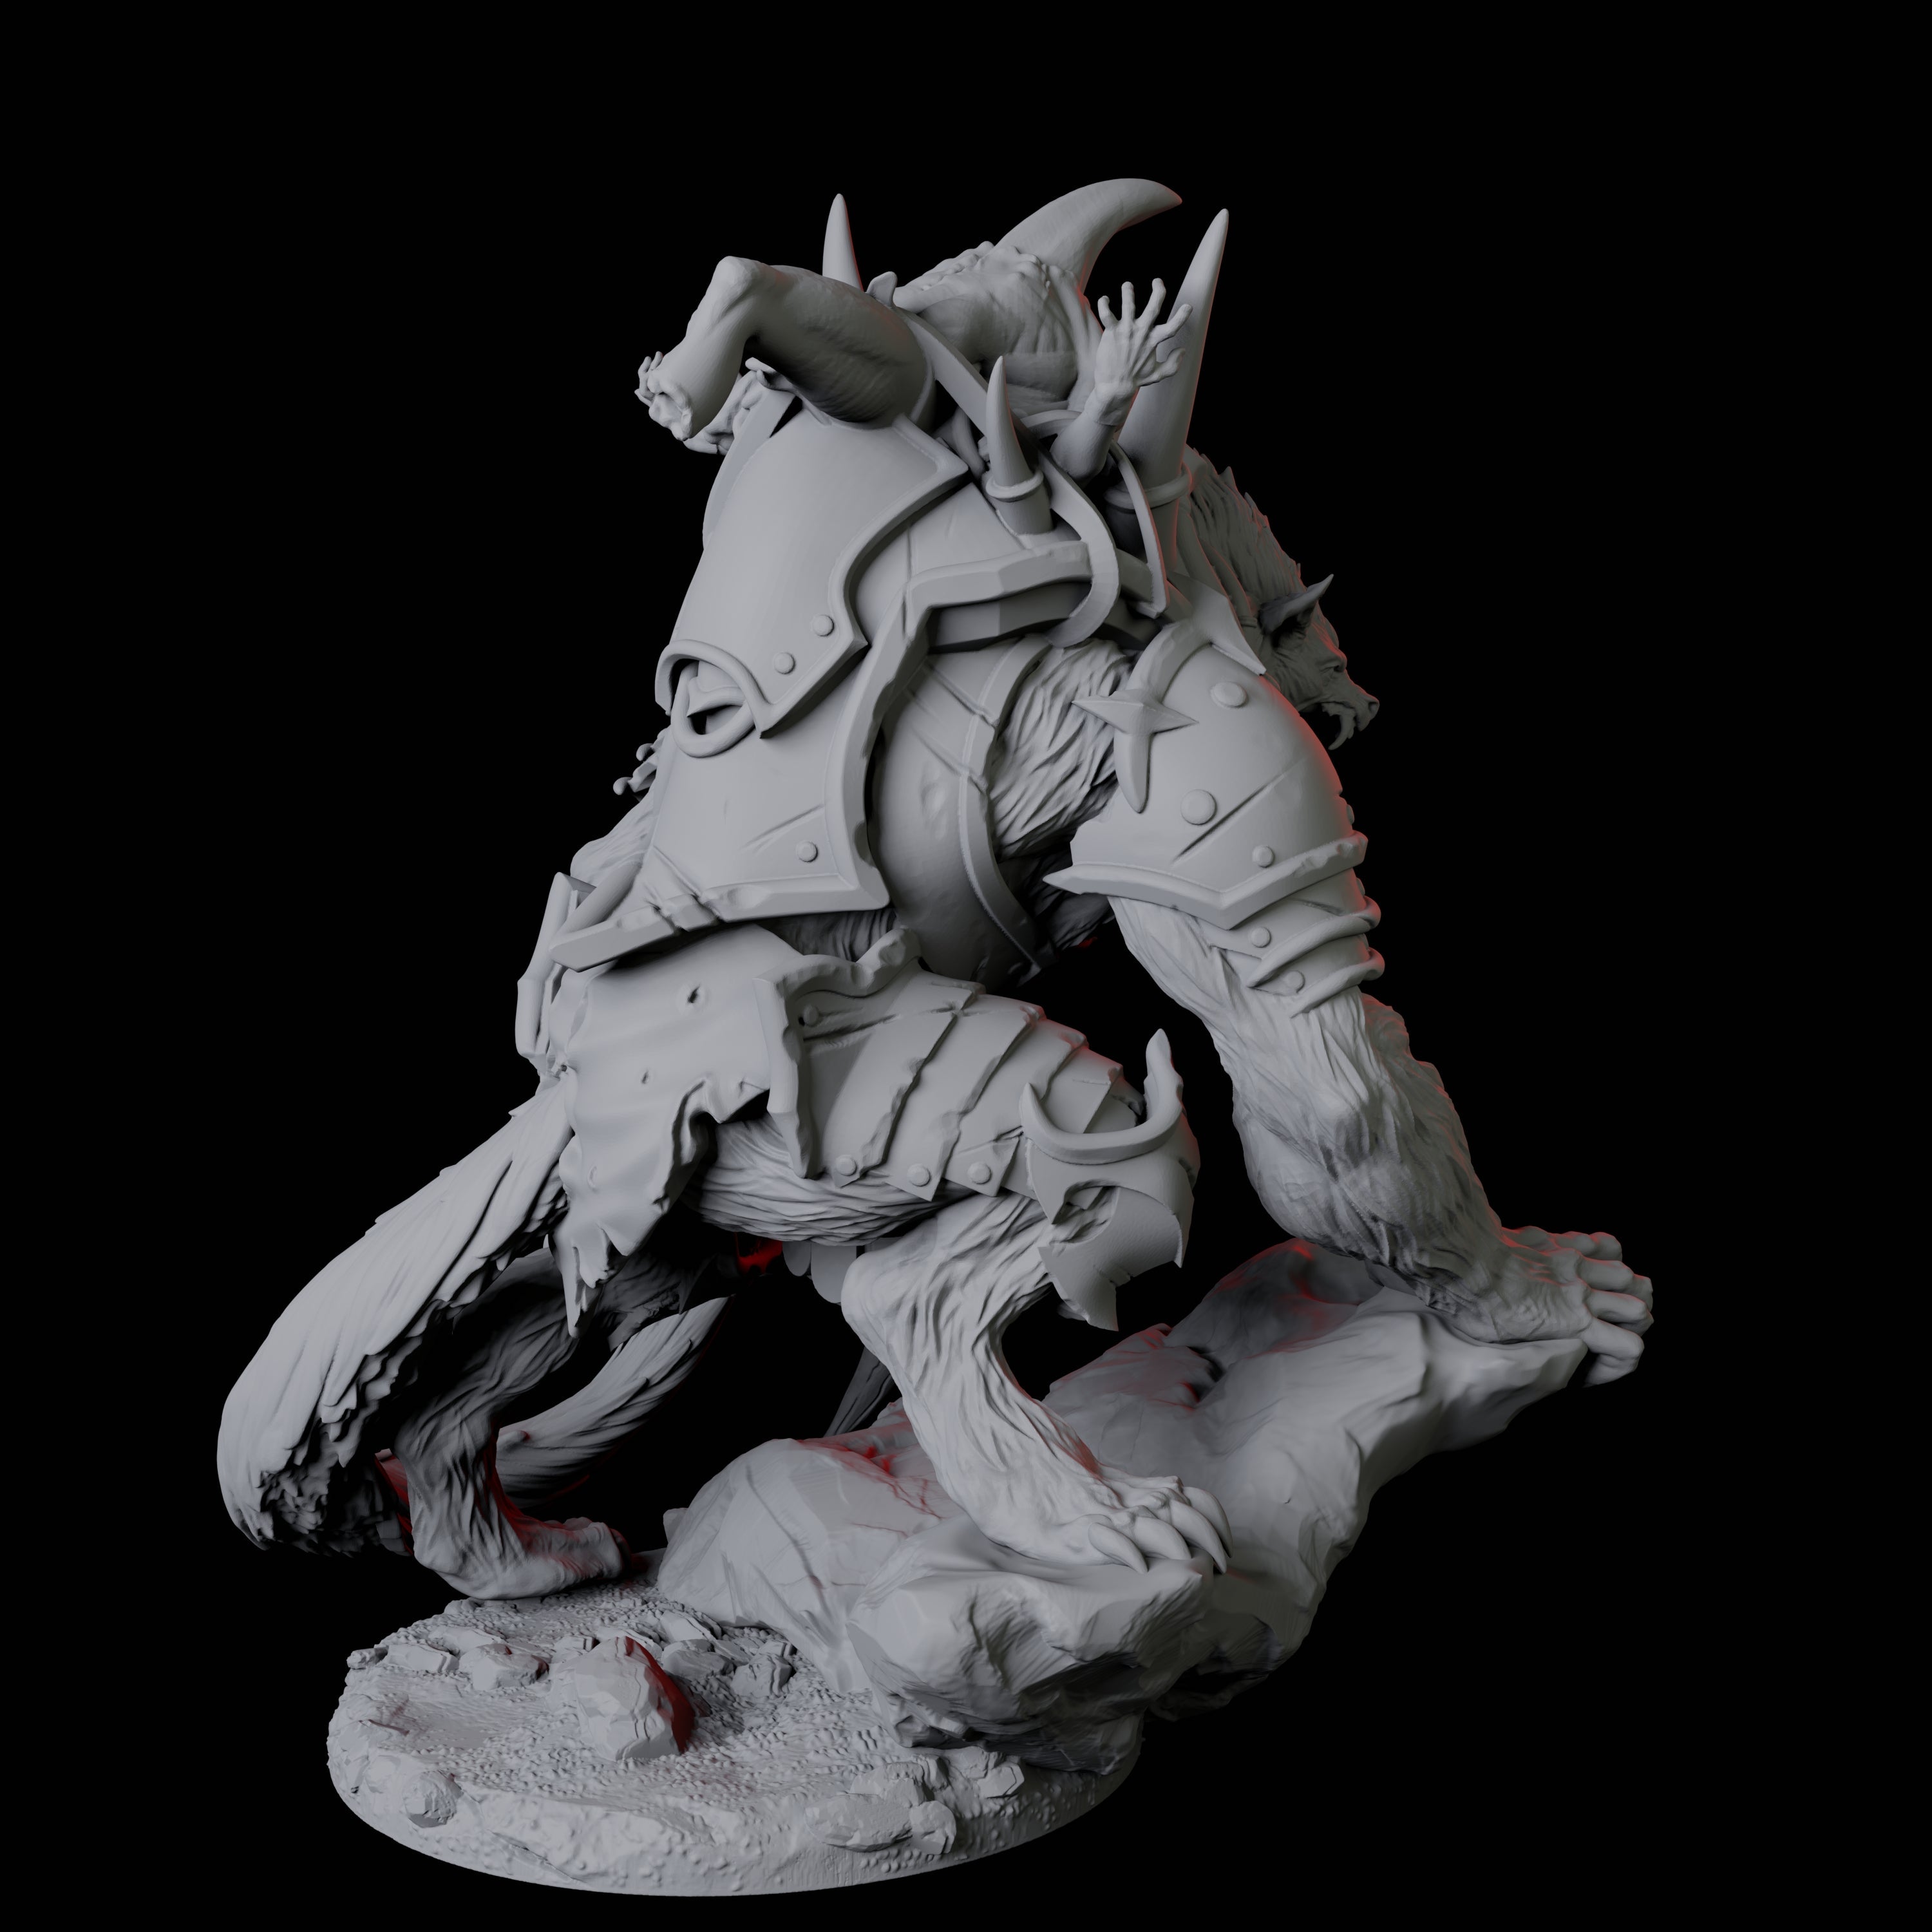 Gnoll Claw Fighter C Miniature for Dungeons and Dragons, Pathfinder or other TTRPGs